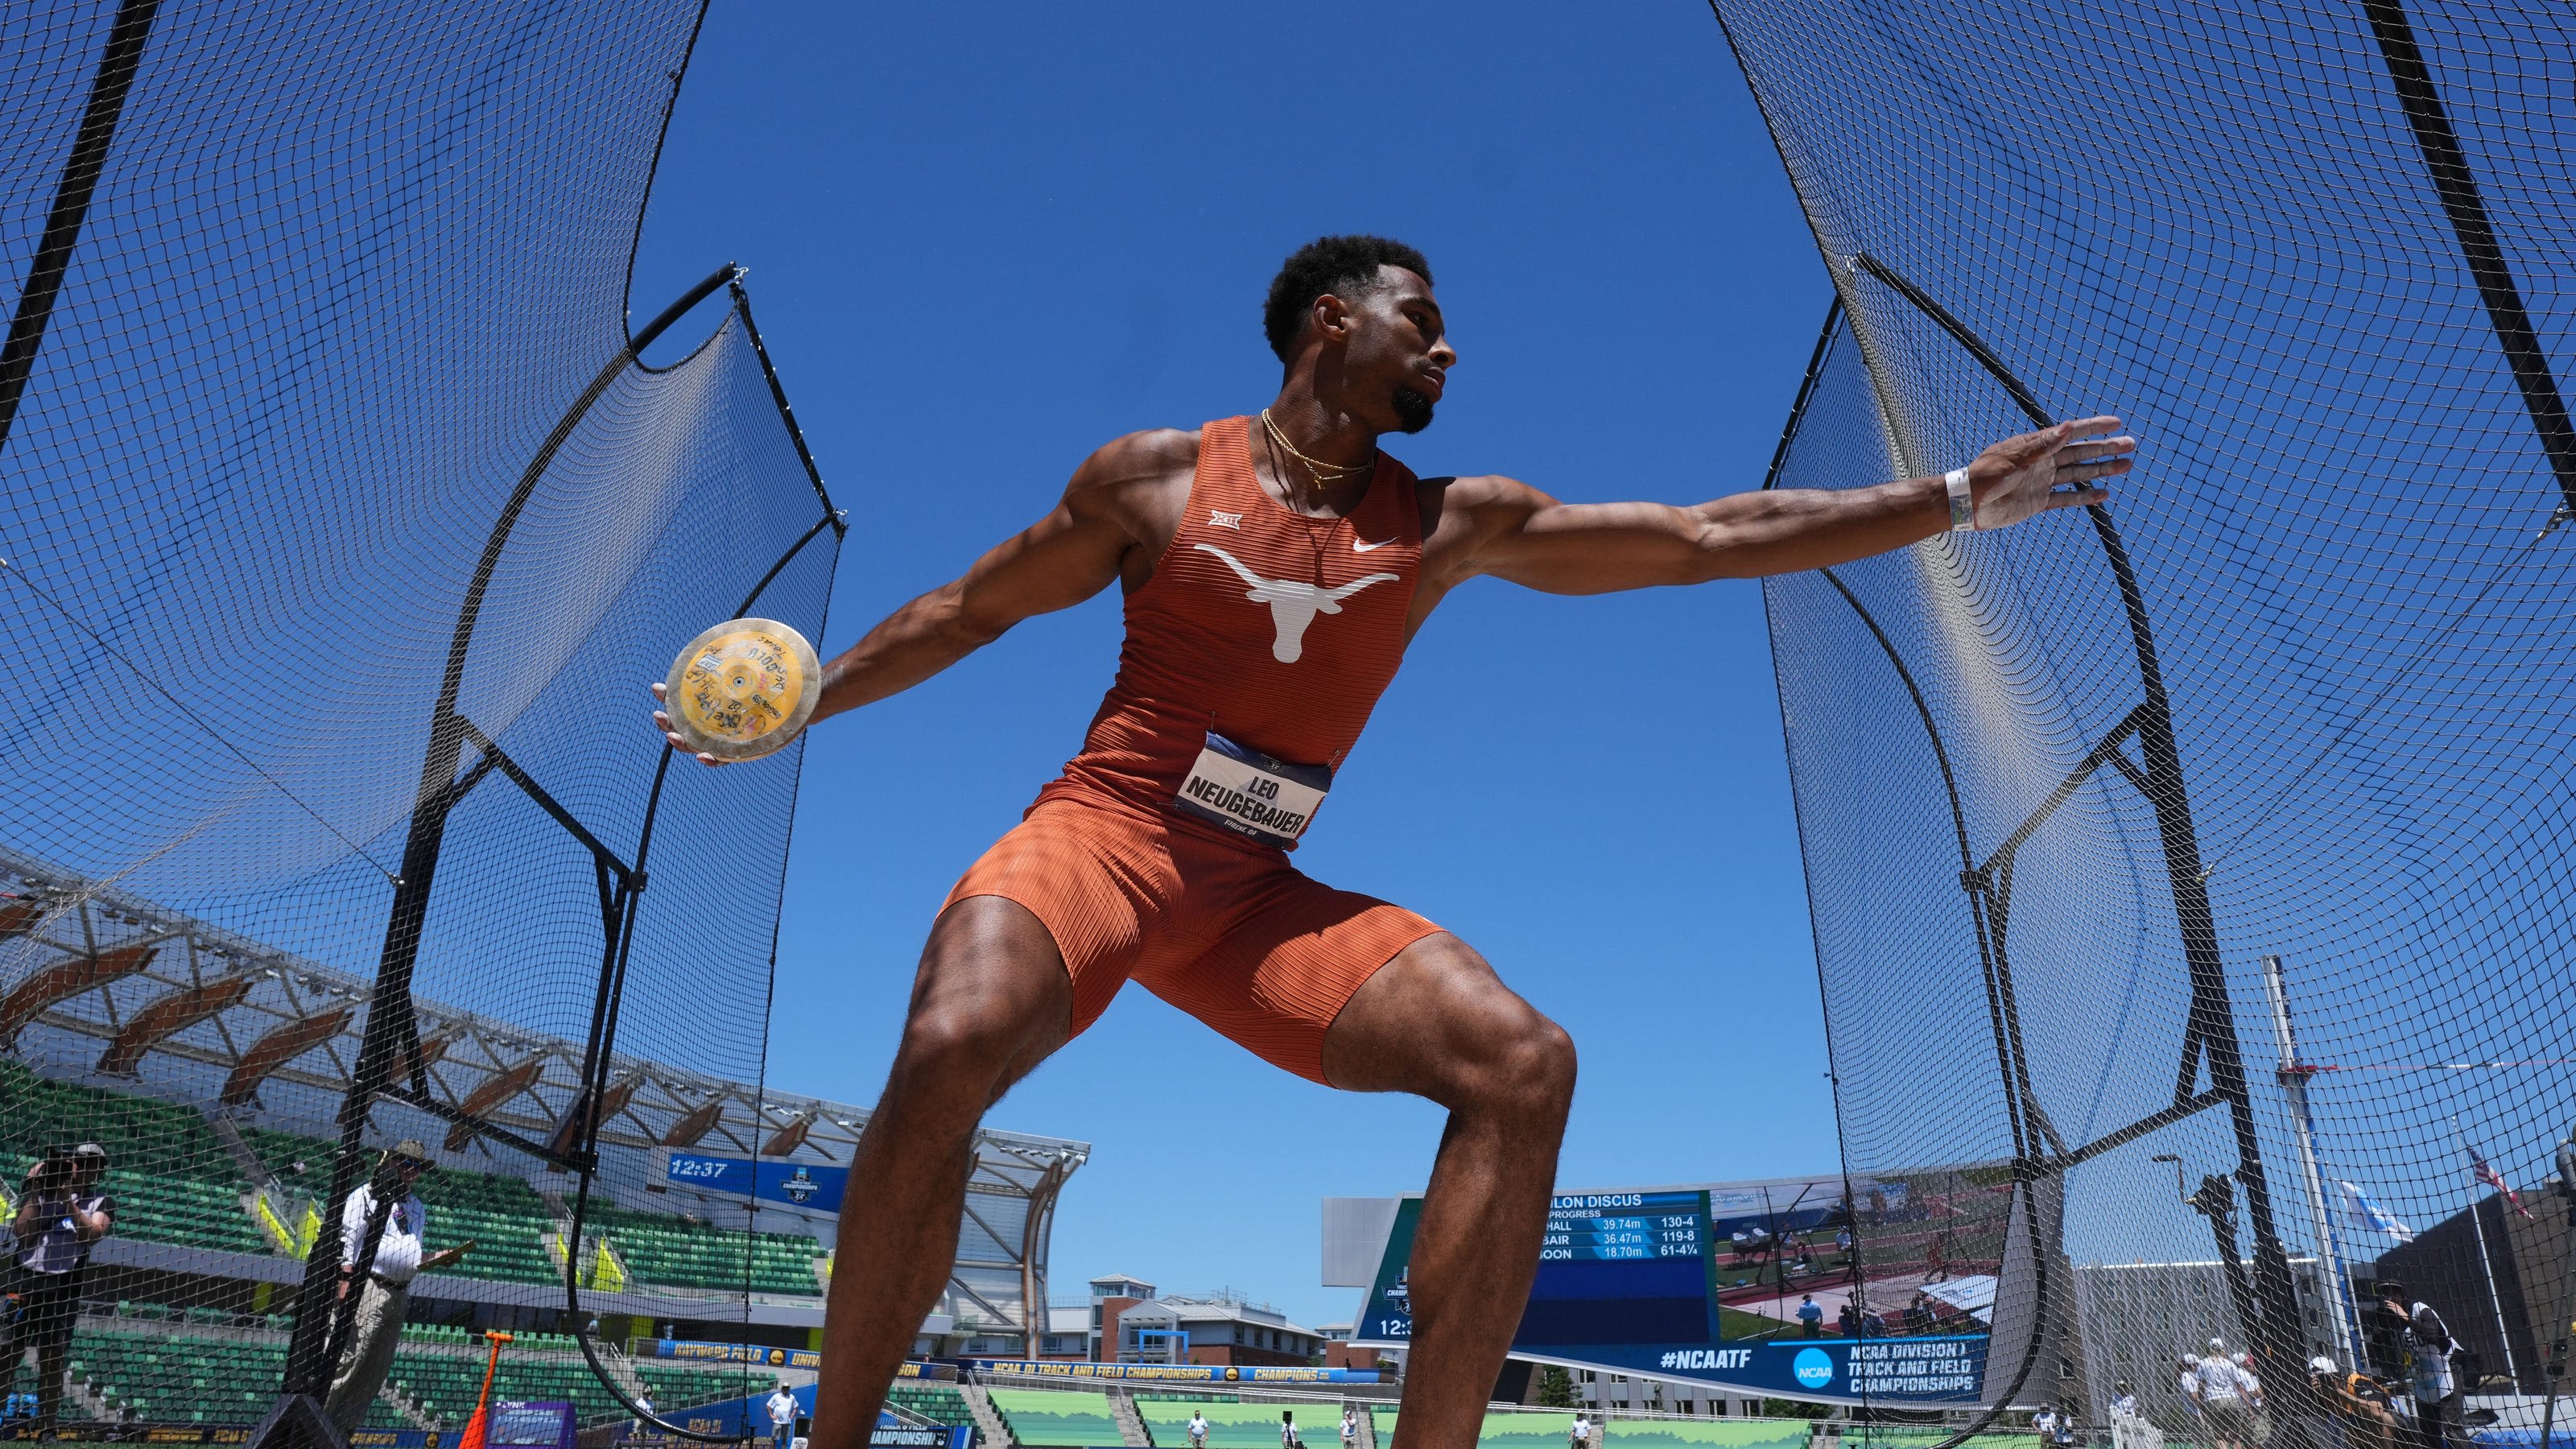 Texas' Leo Neugebauer sets decathlon discus record at NCAA outdoor track championships